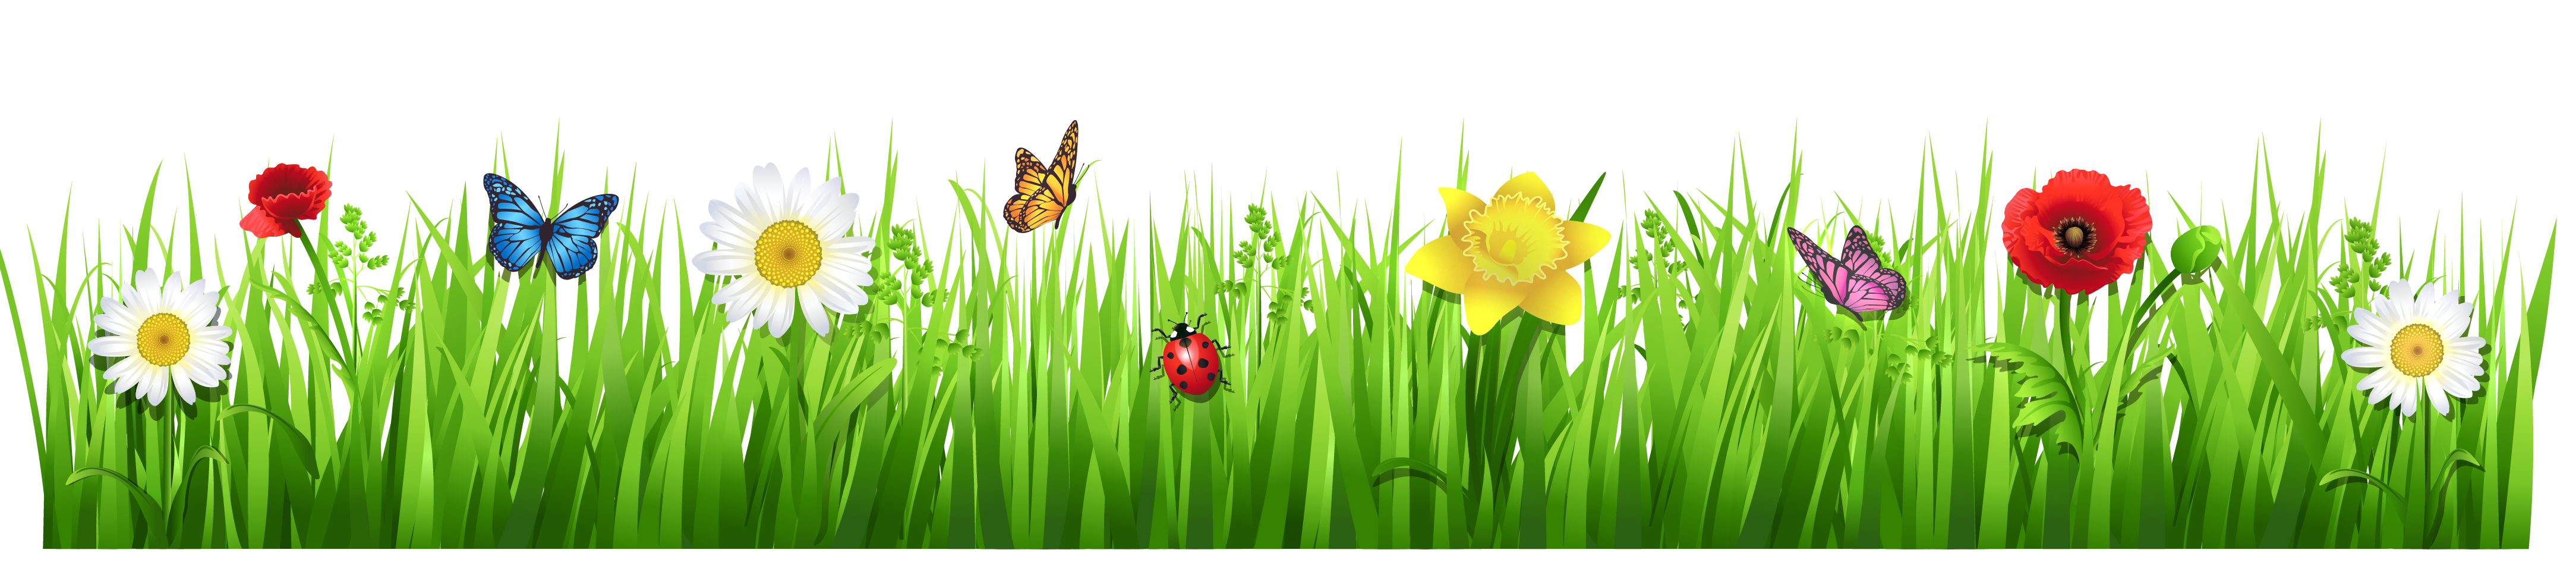 clipart pictures of spring flowers - photo #44